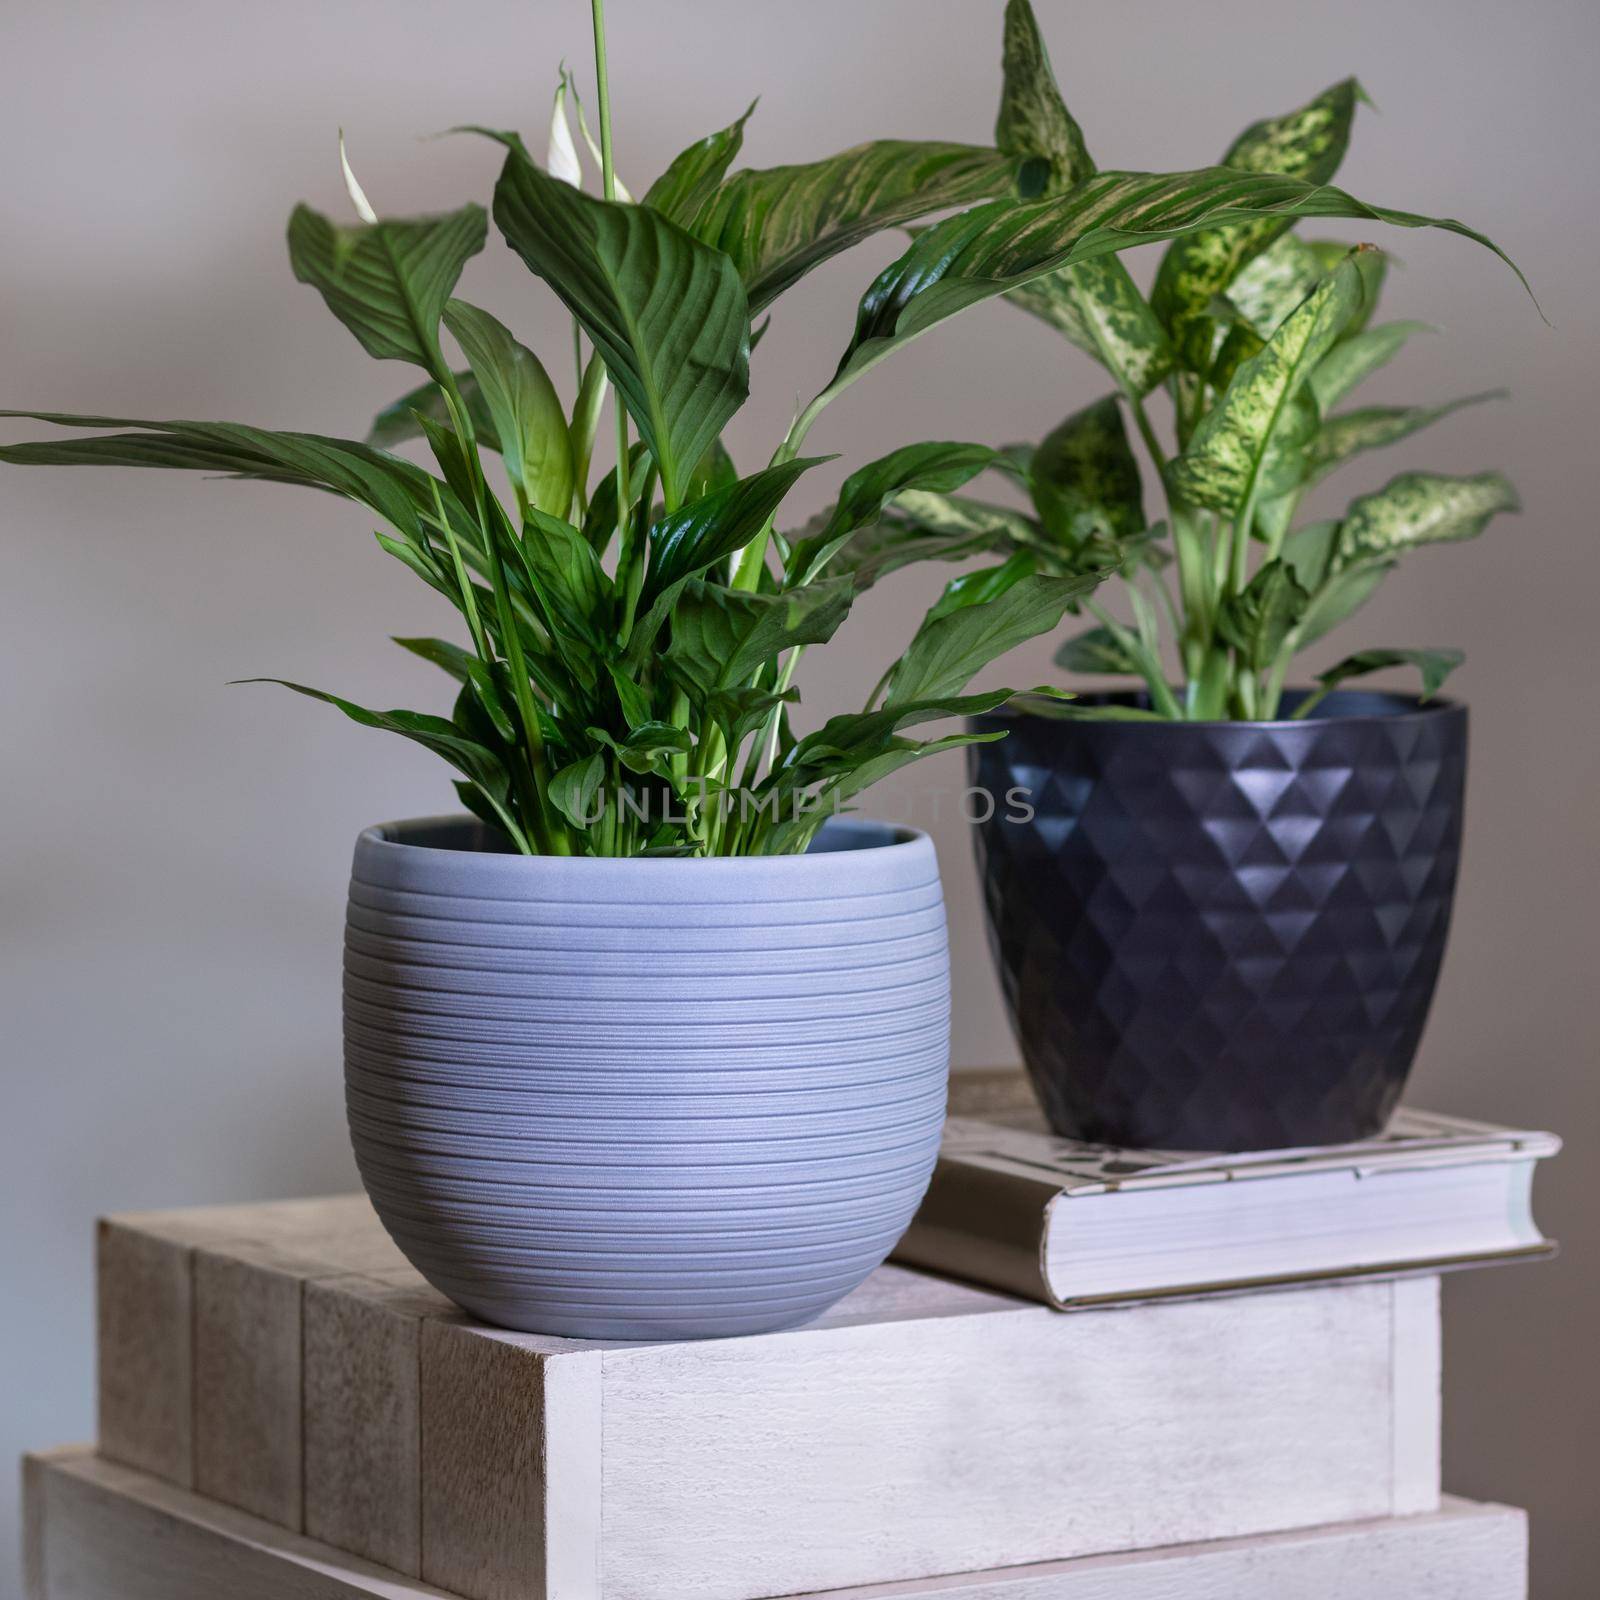 Dieffenbachia Dumb canes with Peace Lily, Spathiphyllum plant